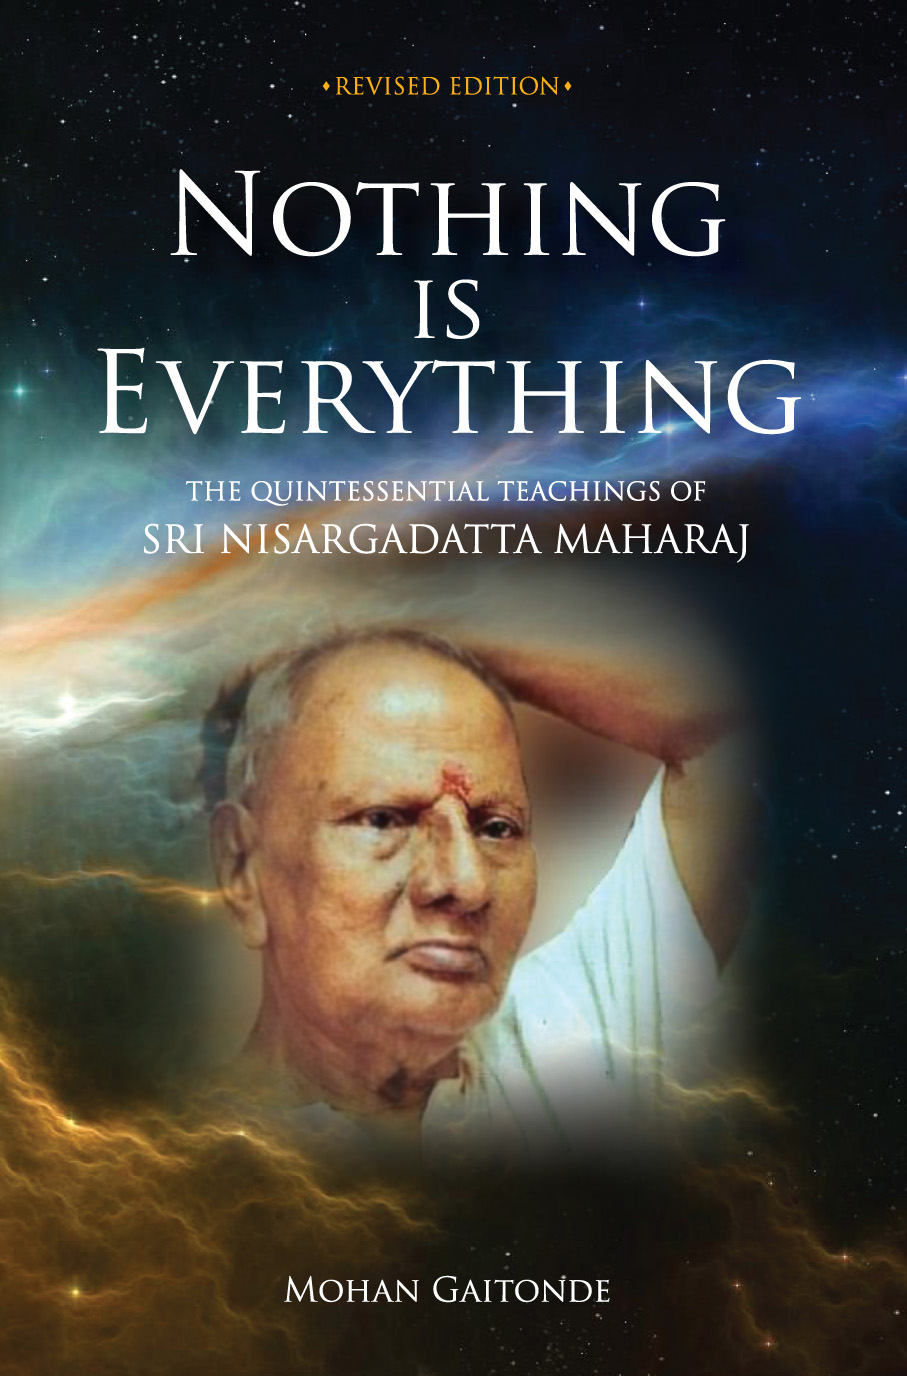 The book cover for Nothing is Everything.